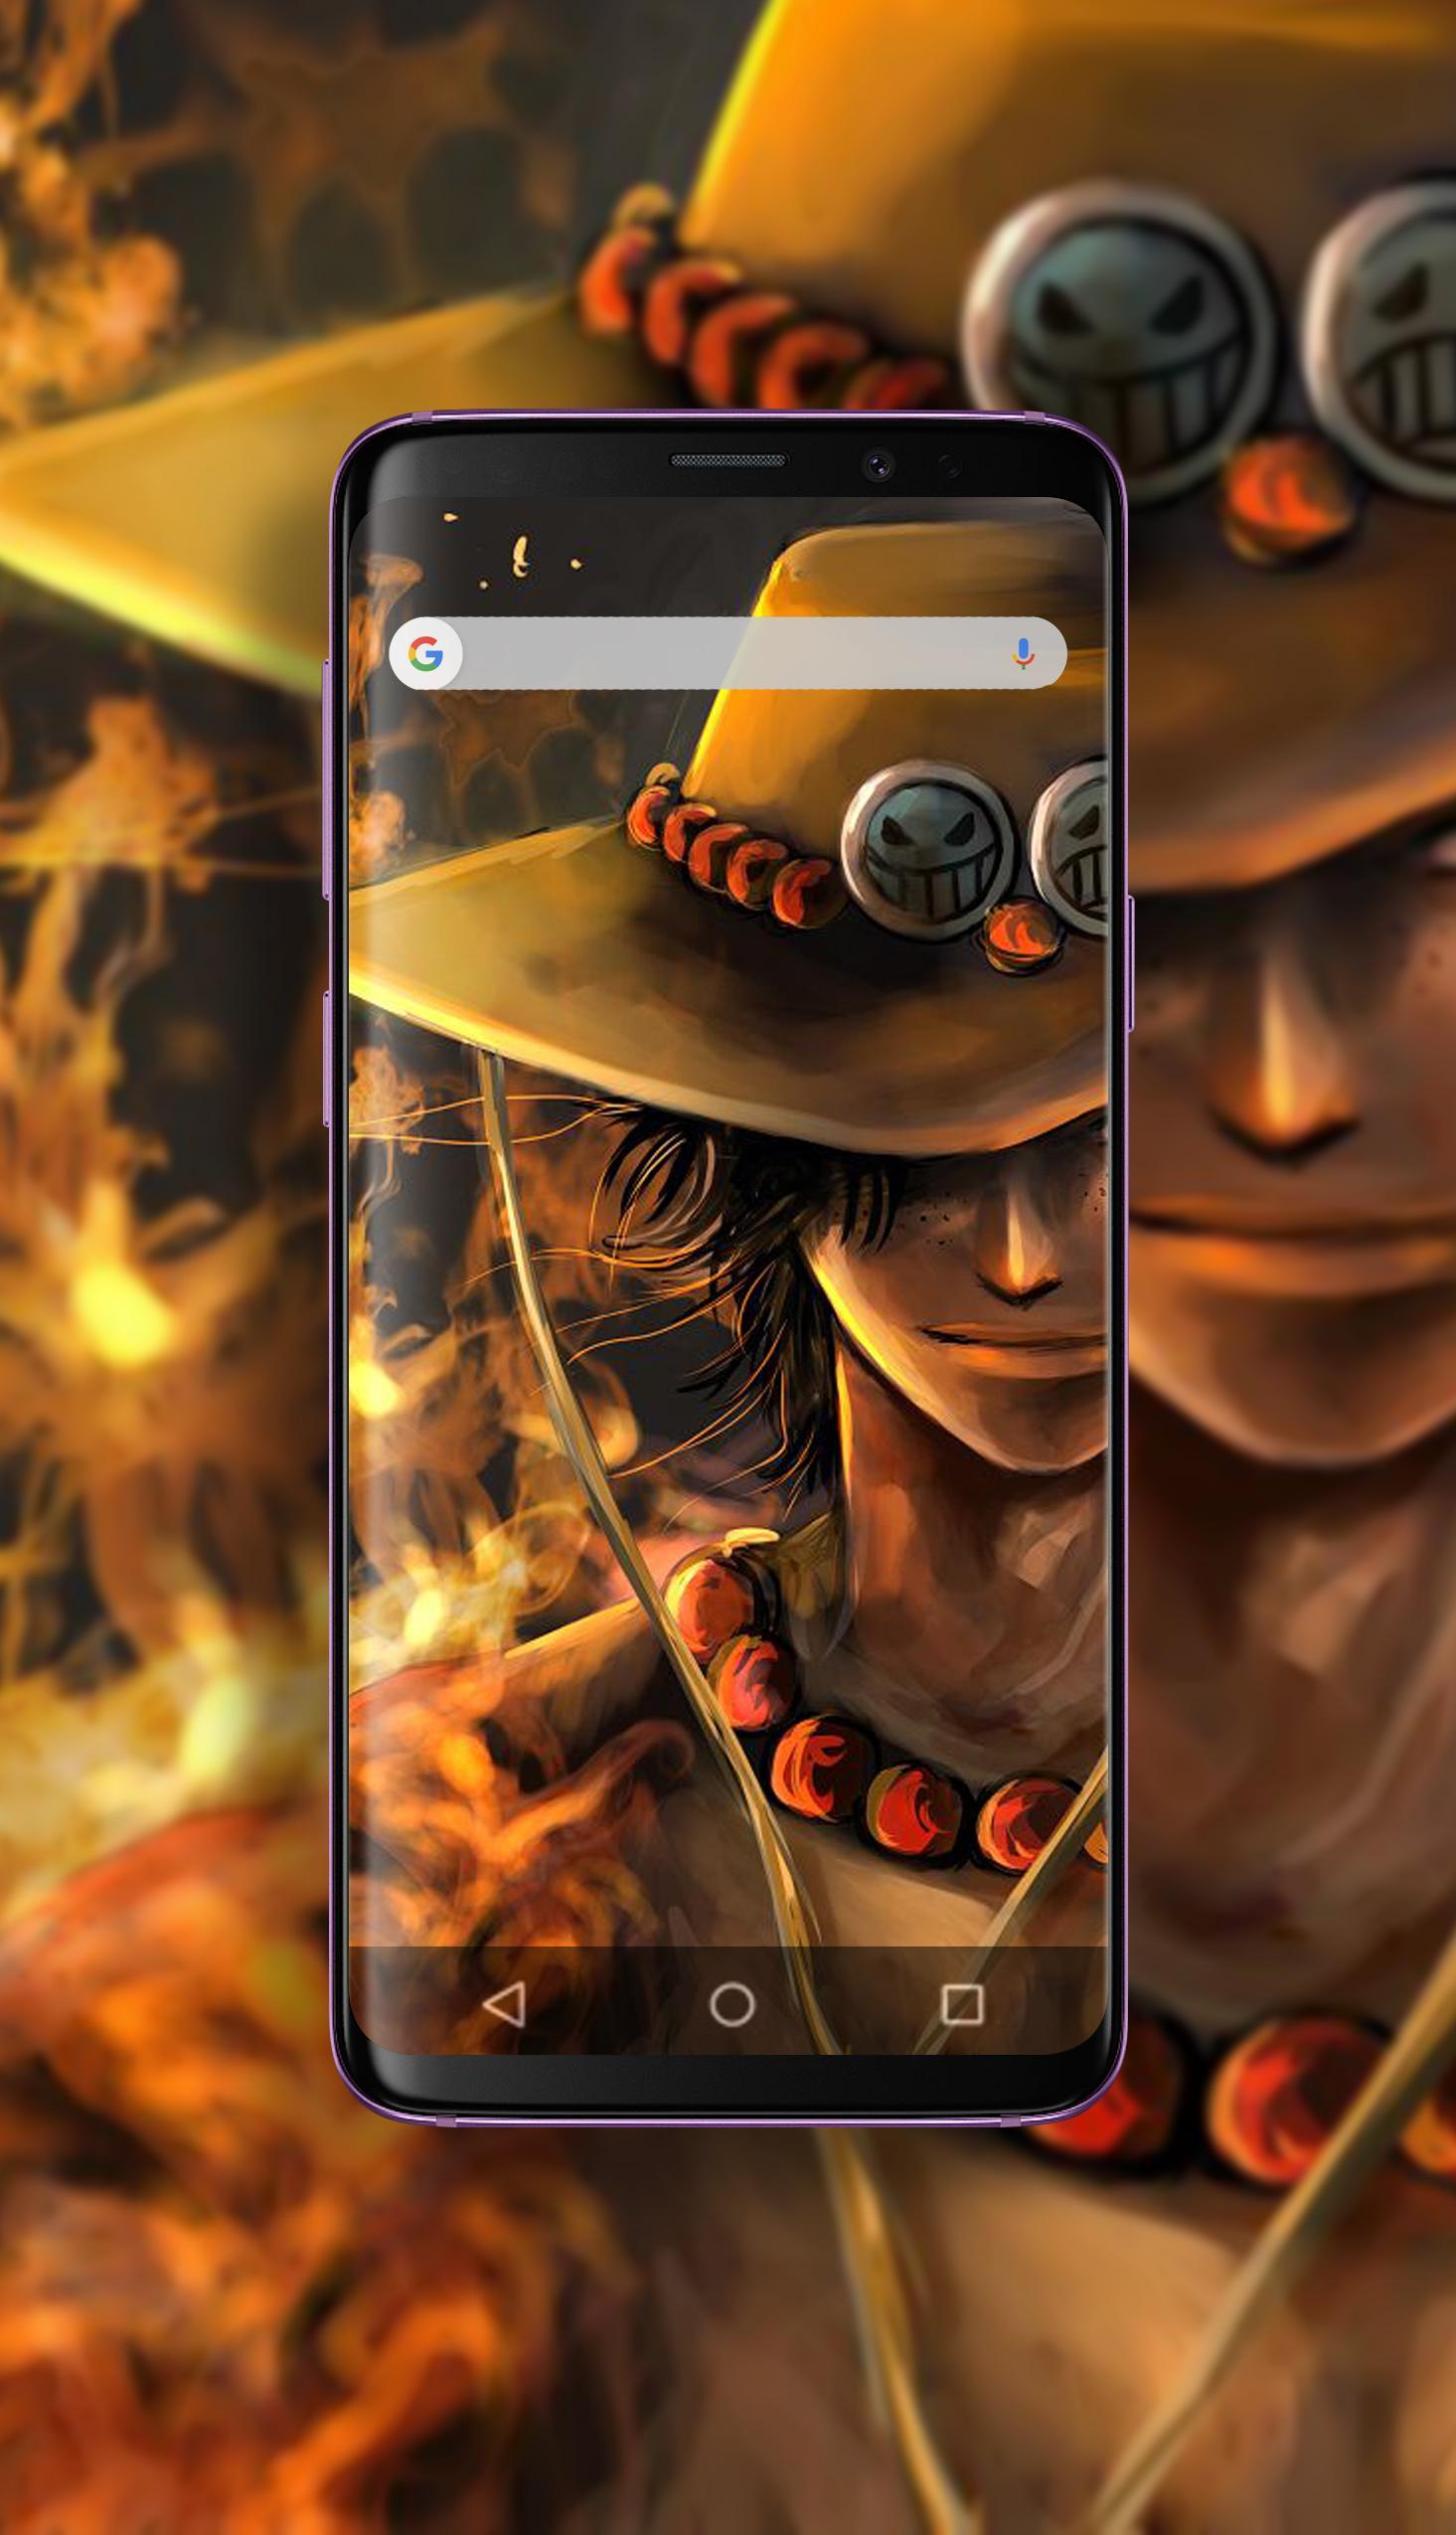 Portgas D Ace Wallpaper Hd For Android Apk Download